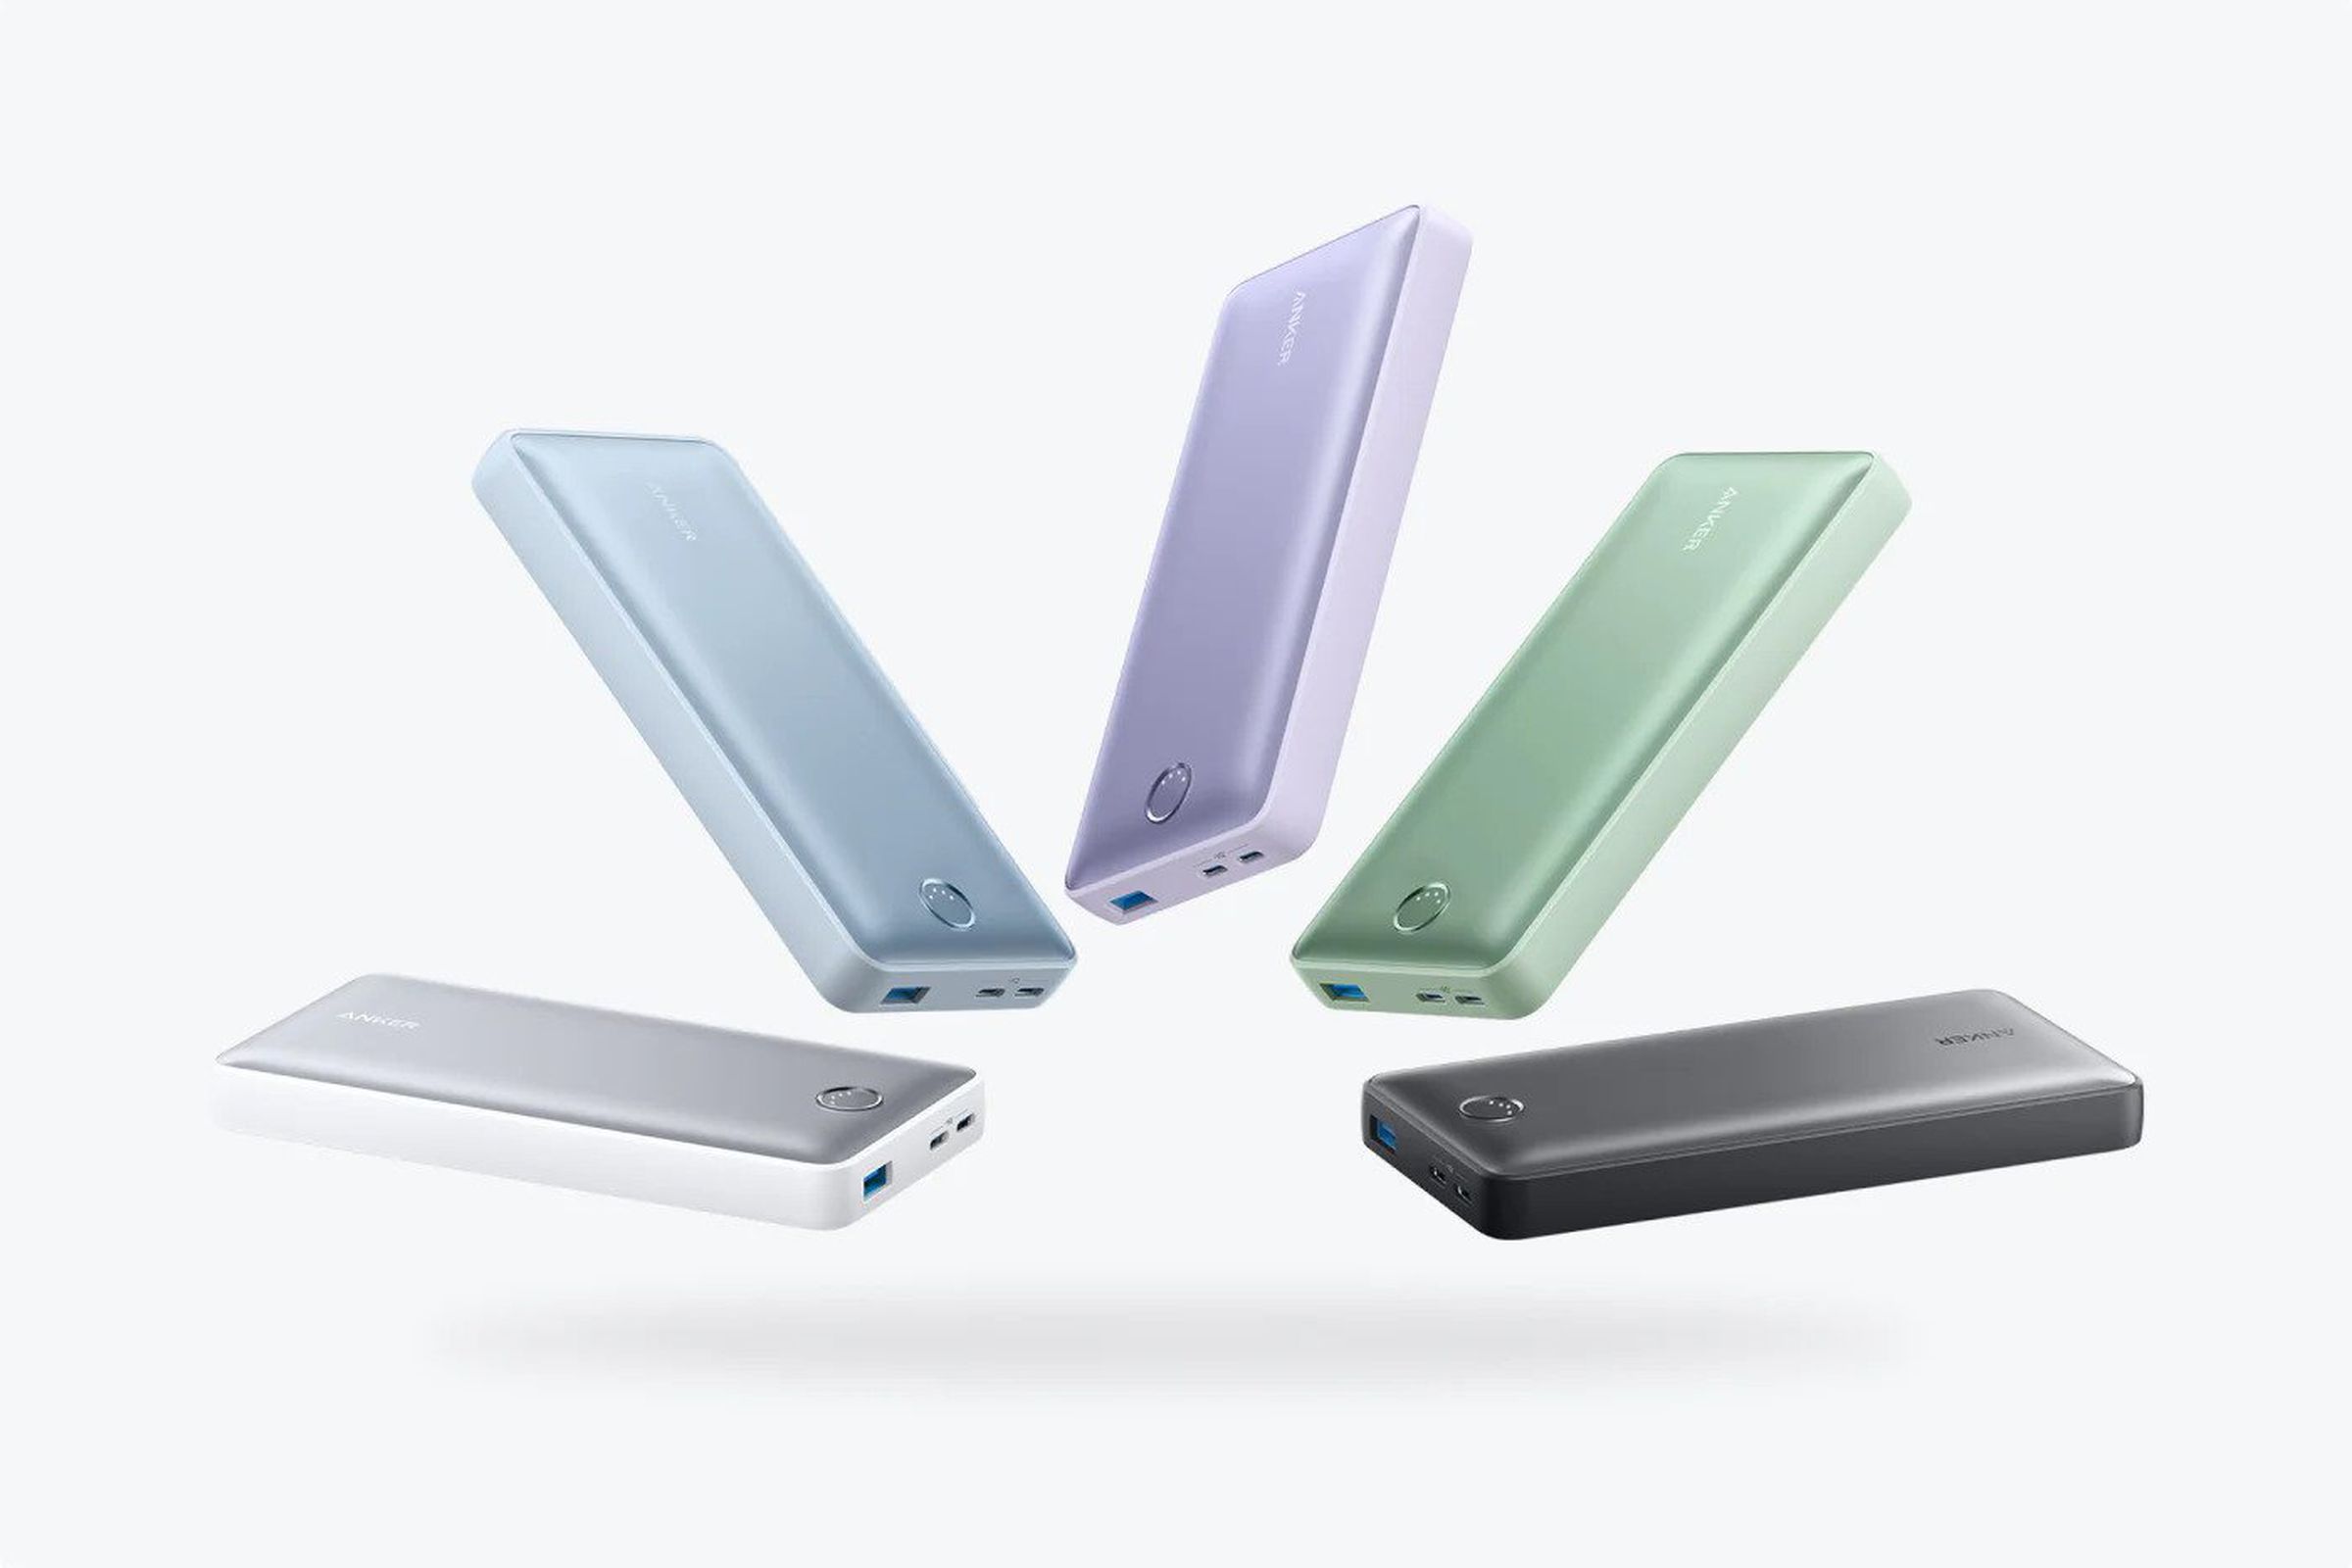 The Anker 535 Power Bank (PowerCore 20K) is a selection of colors, fanned out across a white background.